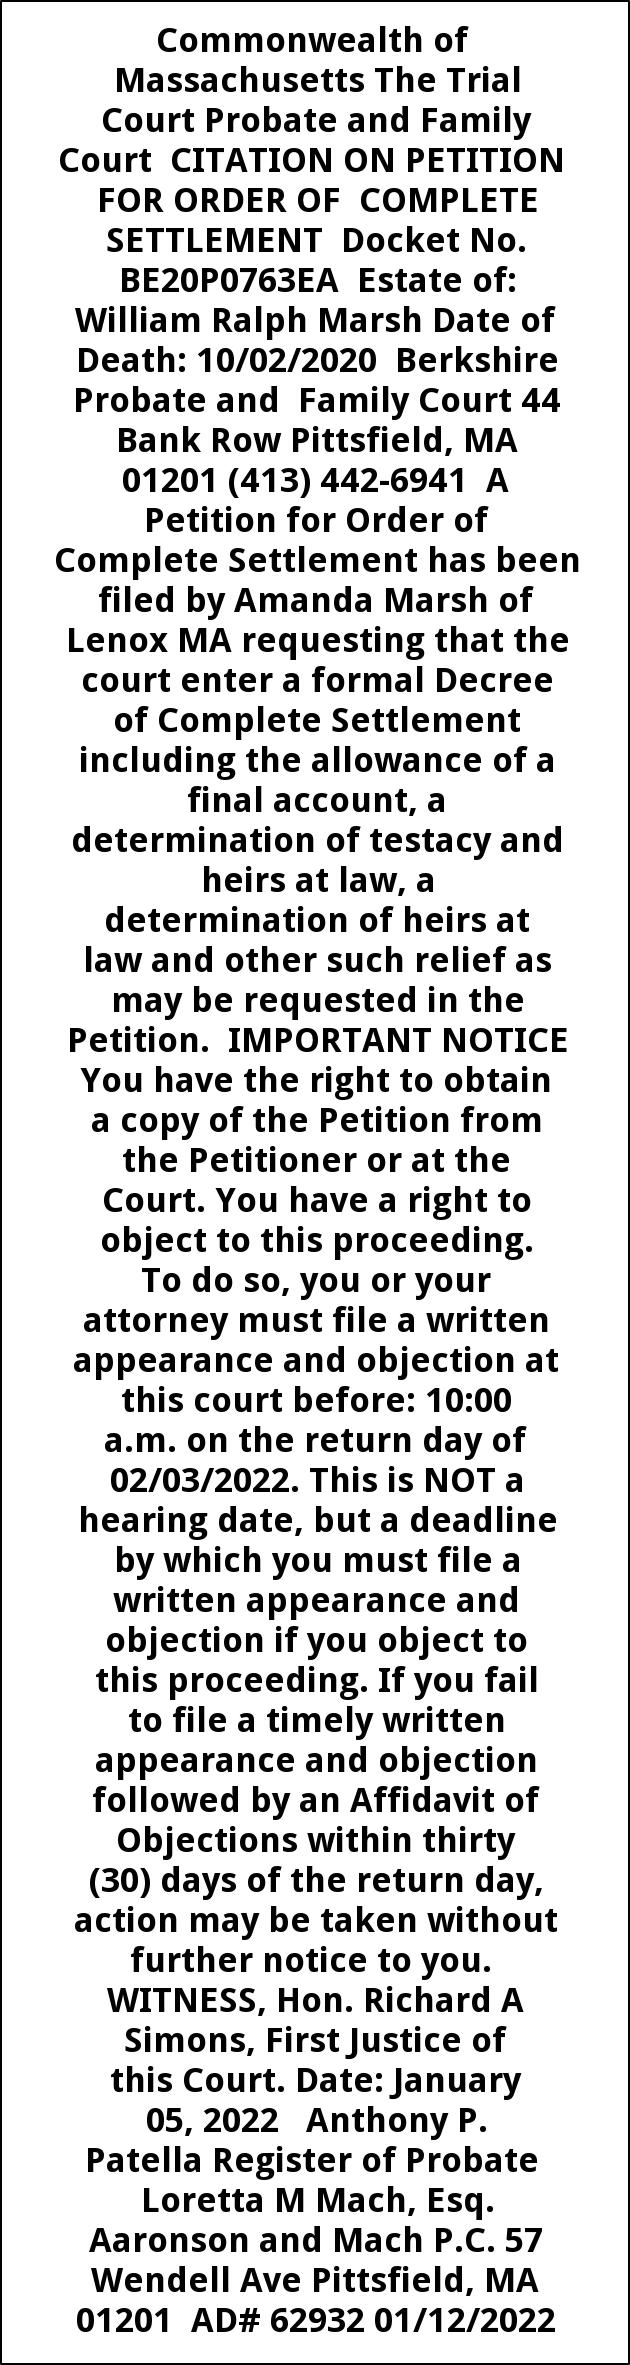 Citation On Petition for Order of Complete Settlement